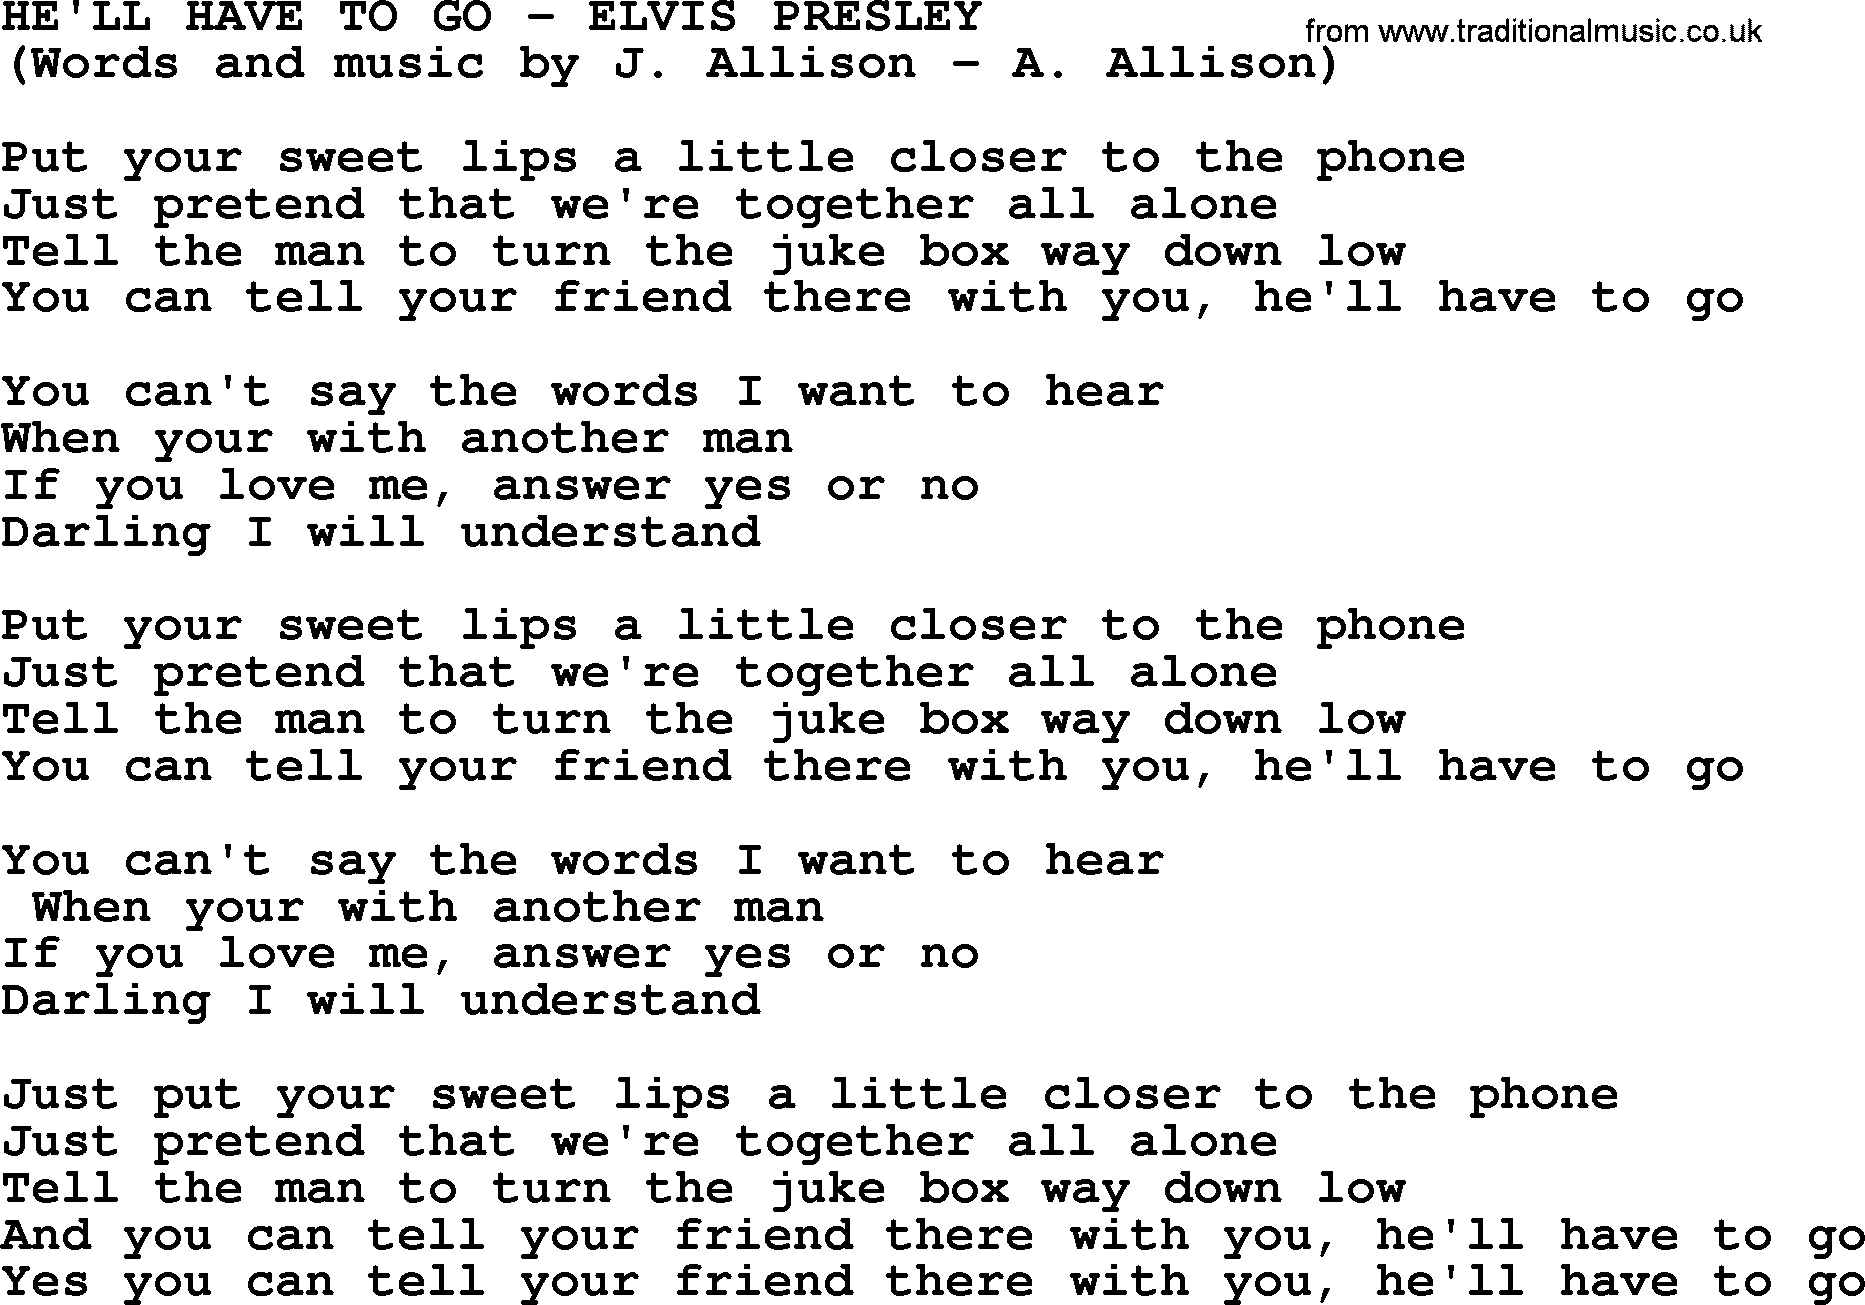 Elvis Presley song: He'll Have To Go lyrics